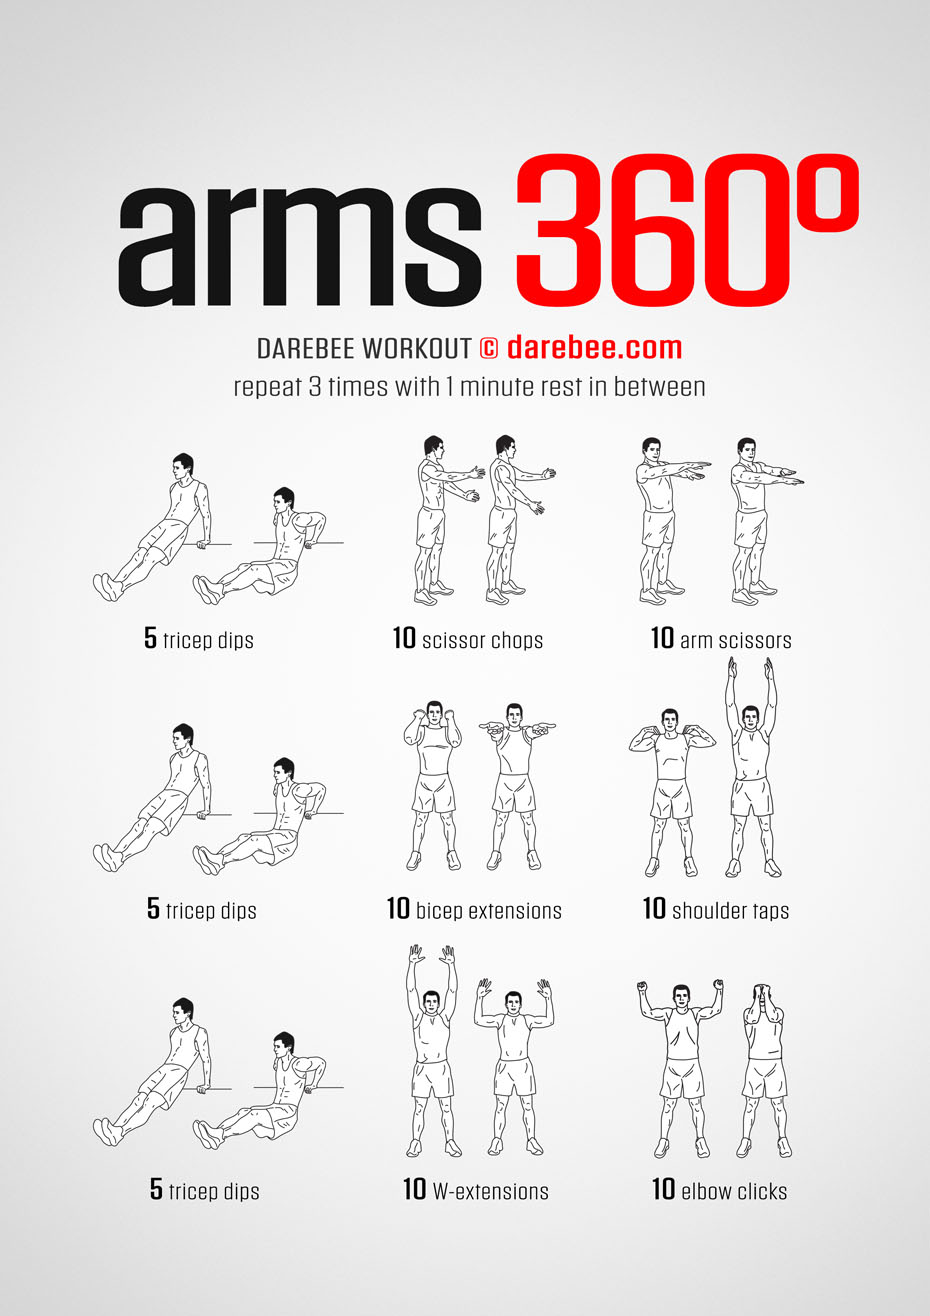 Arms 360 Workout